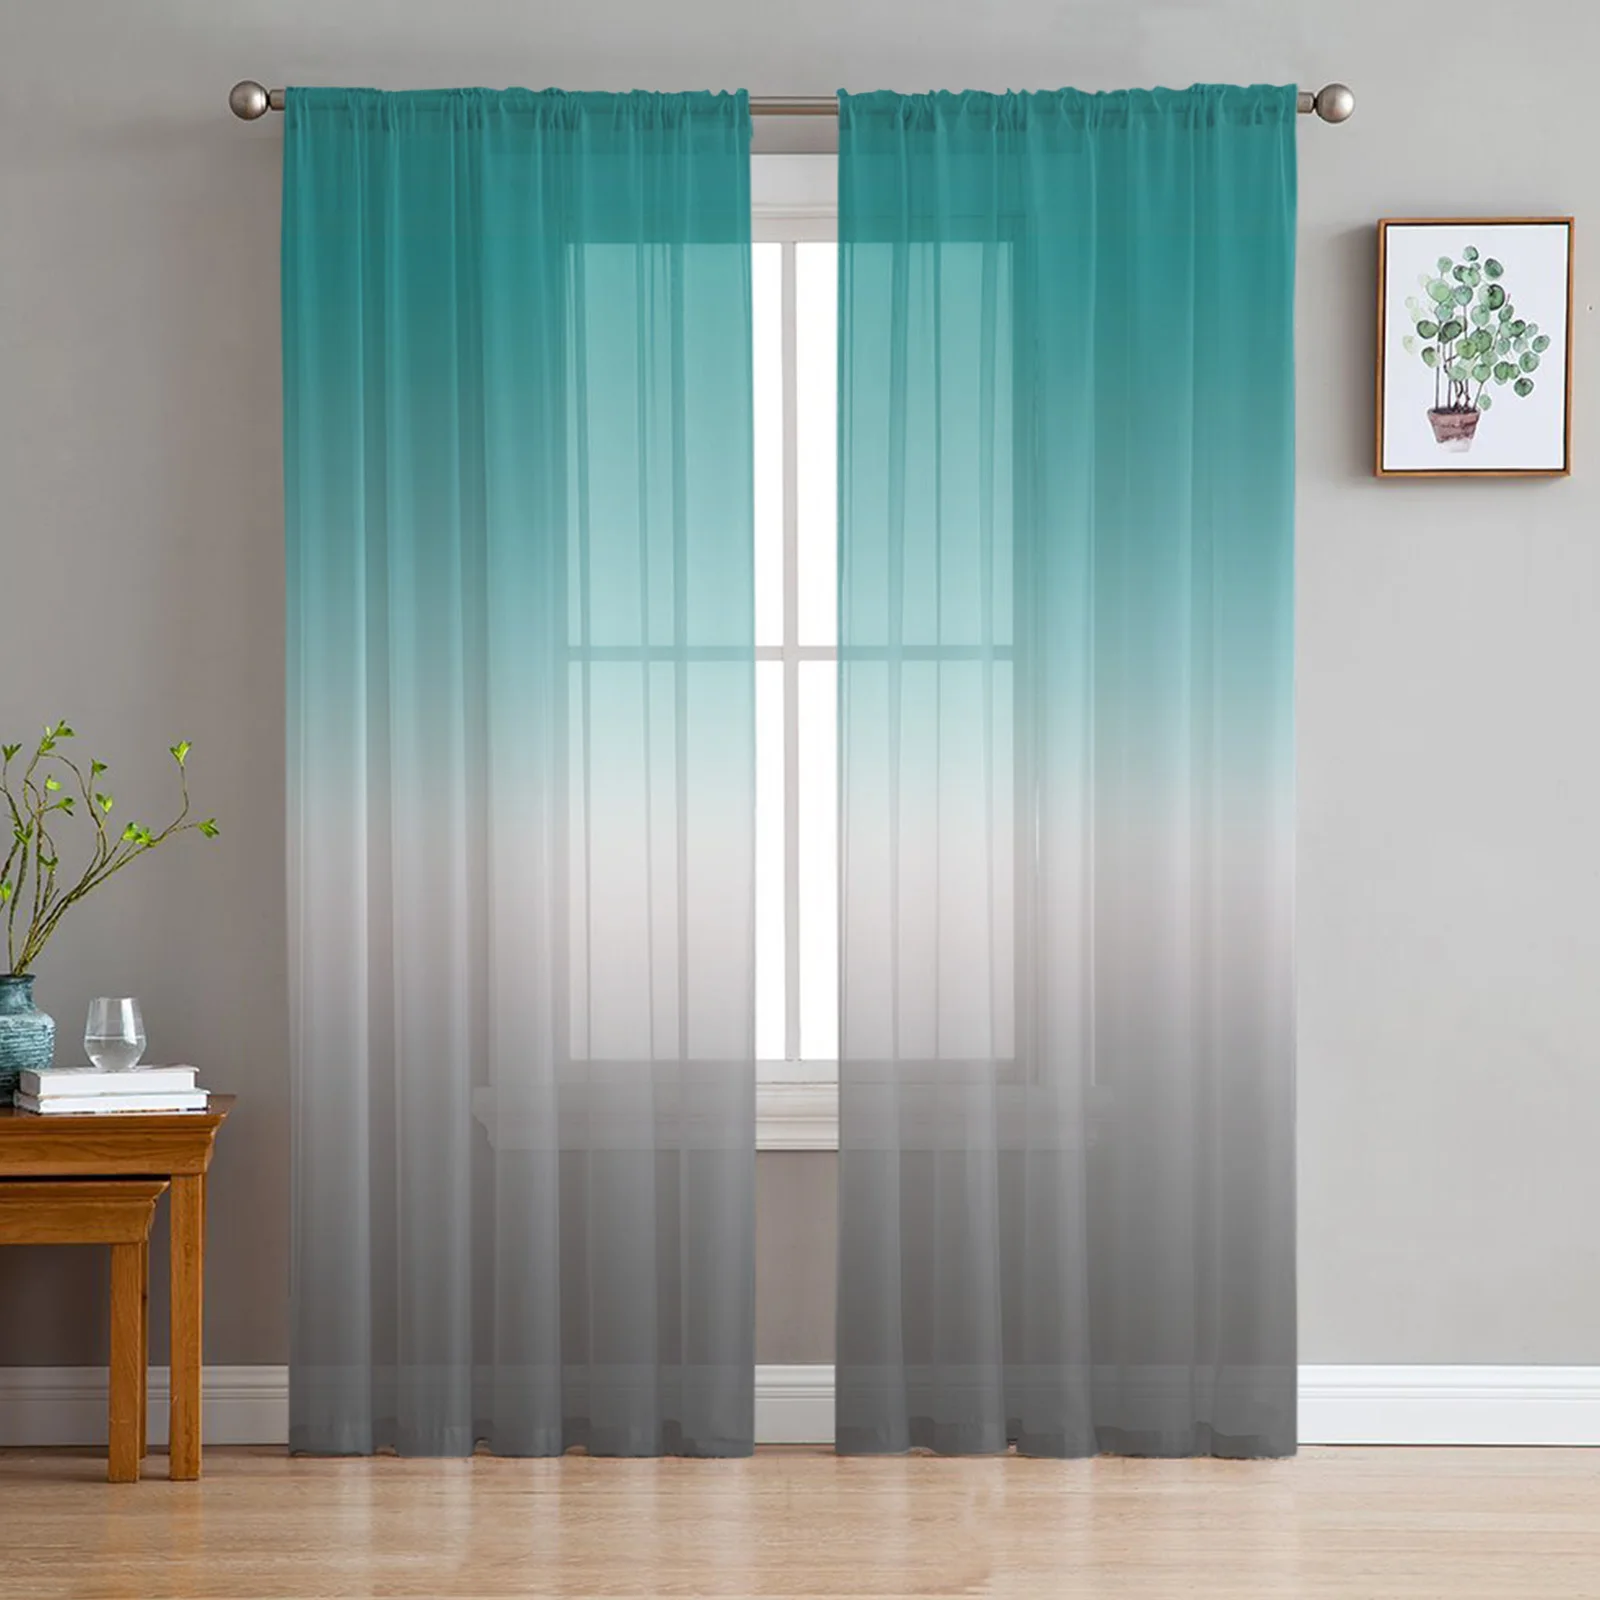 

Cyan Turquoise Gray Gradient Tulle Sheer Curtains for Living Room Bedroom the Room Kitchen Voile Organza Decoration Curtains